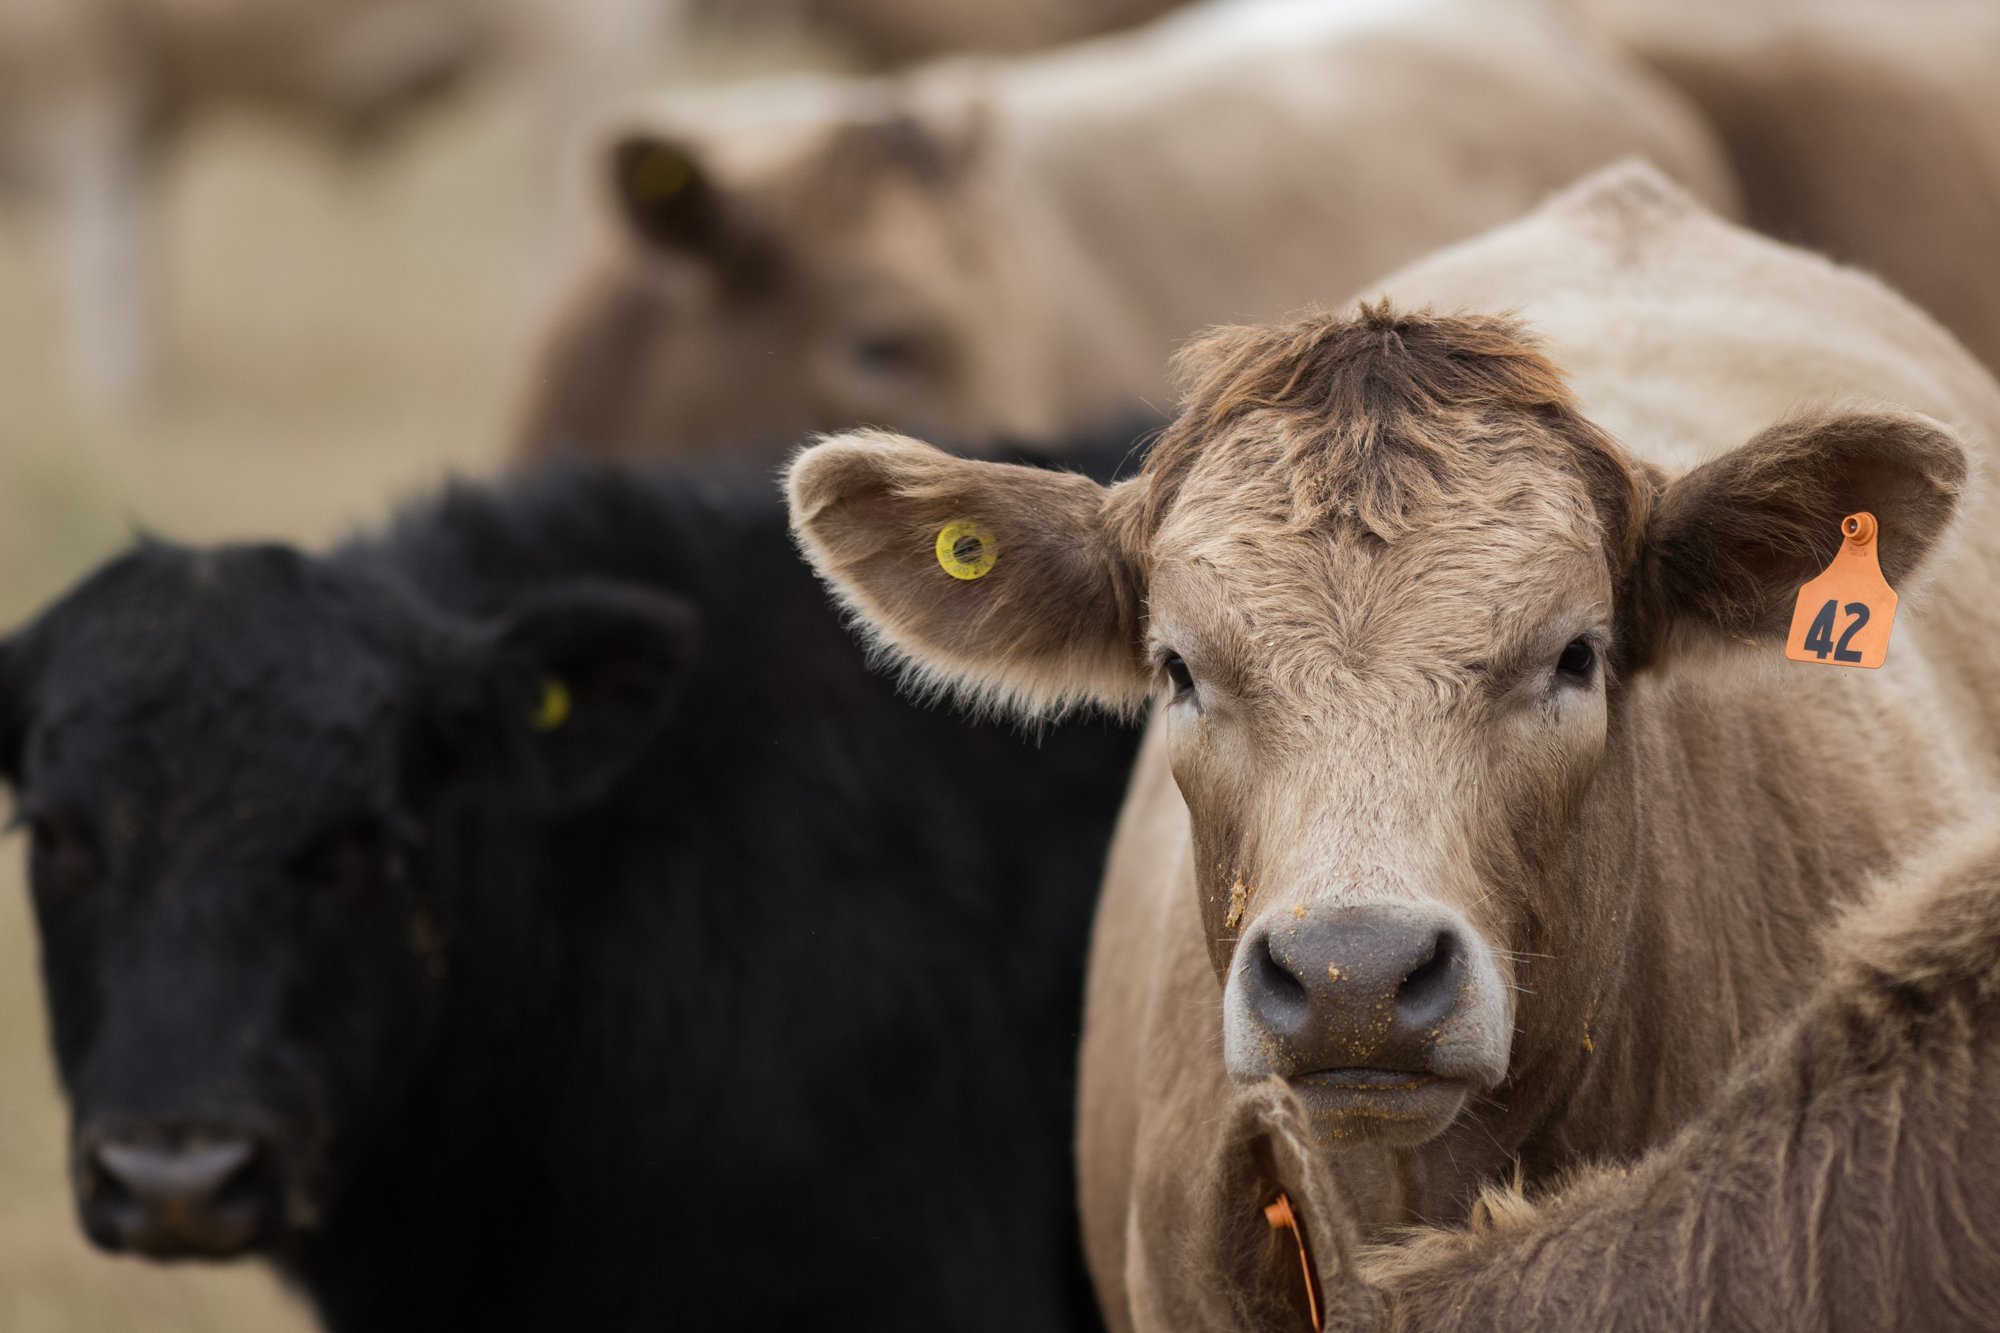 K-State's Glynn Tonsor Says Struggling Cattle Markets Propped Up By Robust Domestic Beef Demand